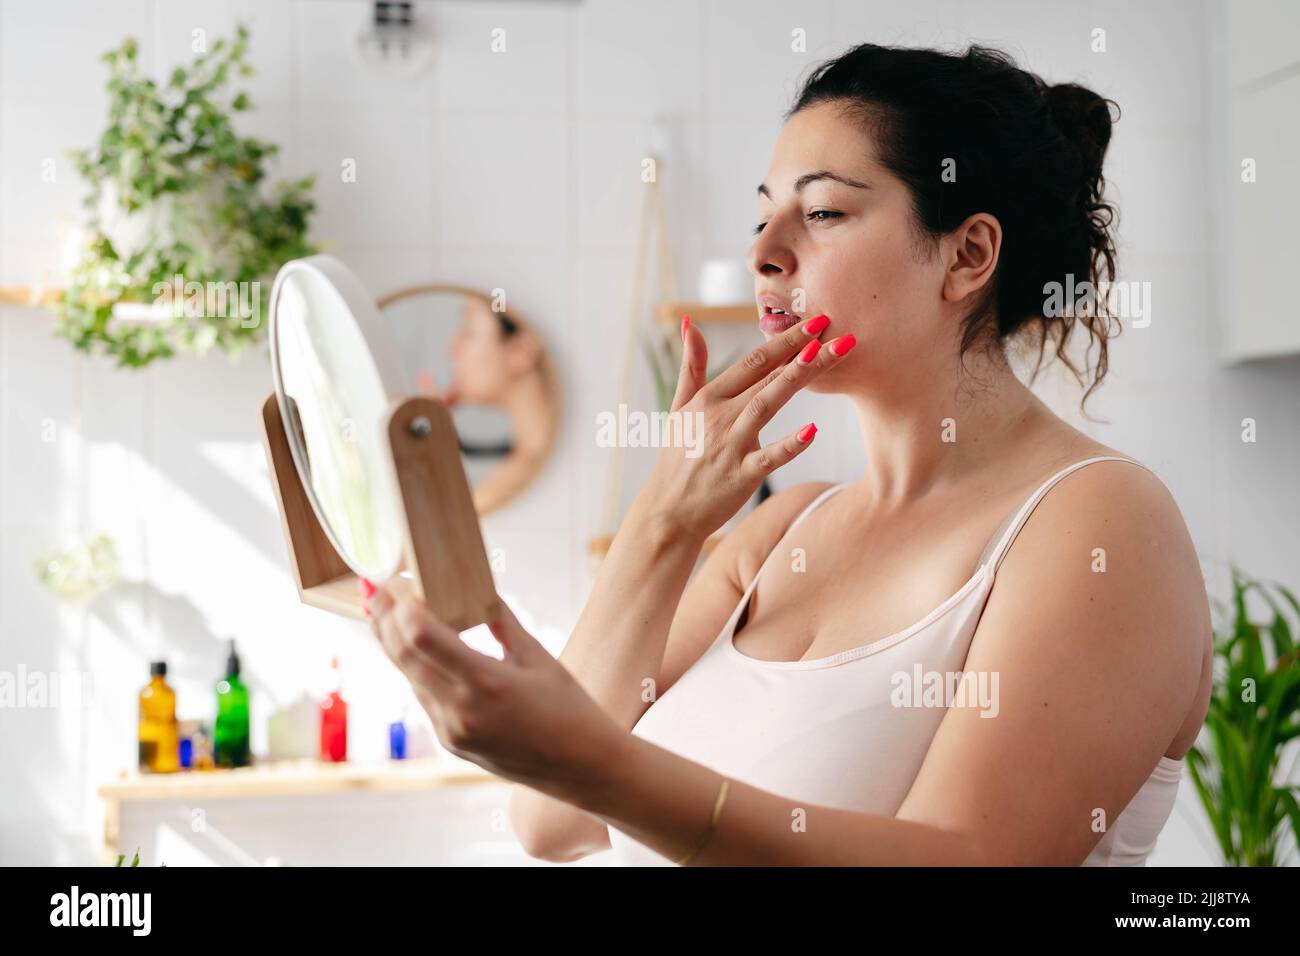 Young woman looking at the mirrow and examine her face in white bathroom. Wellness and body positivity Stock Photo